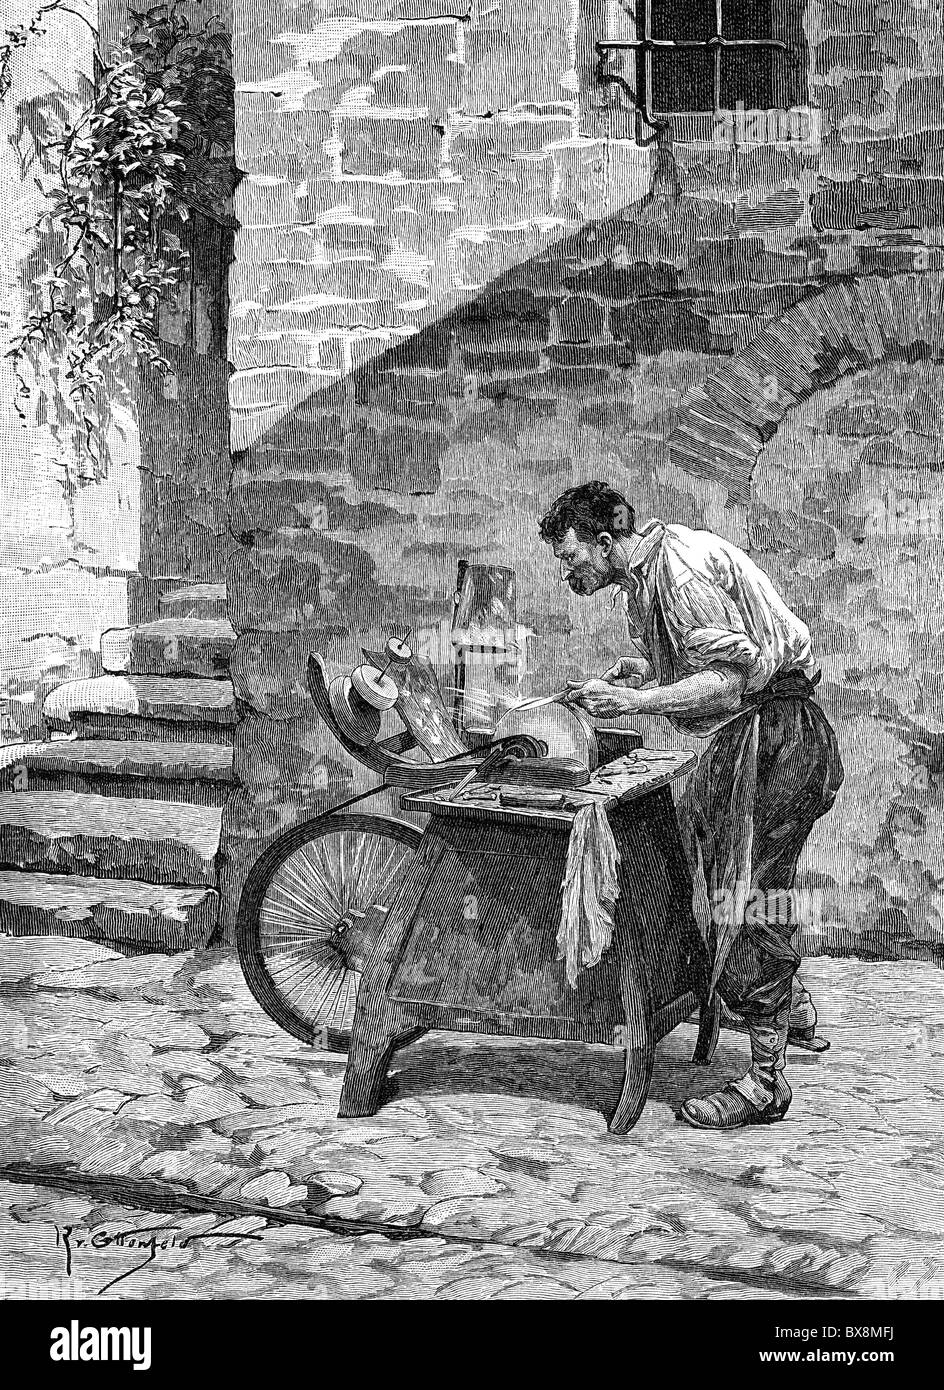 people, professions, scissor grinder, Val Redena, Trentino, Italy, wood engraving, late 19th century, handcraft, craftsman, Moleta, grinding stone, scissors, Austria-Hungary, Austria, Austro-Hungarian empire, Austro - Hungarian, Cisleithania, historic, historical, Additional-Rights-Clearences-Not Available Stock Photo